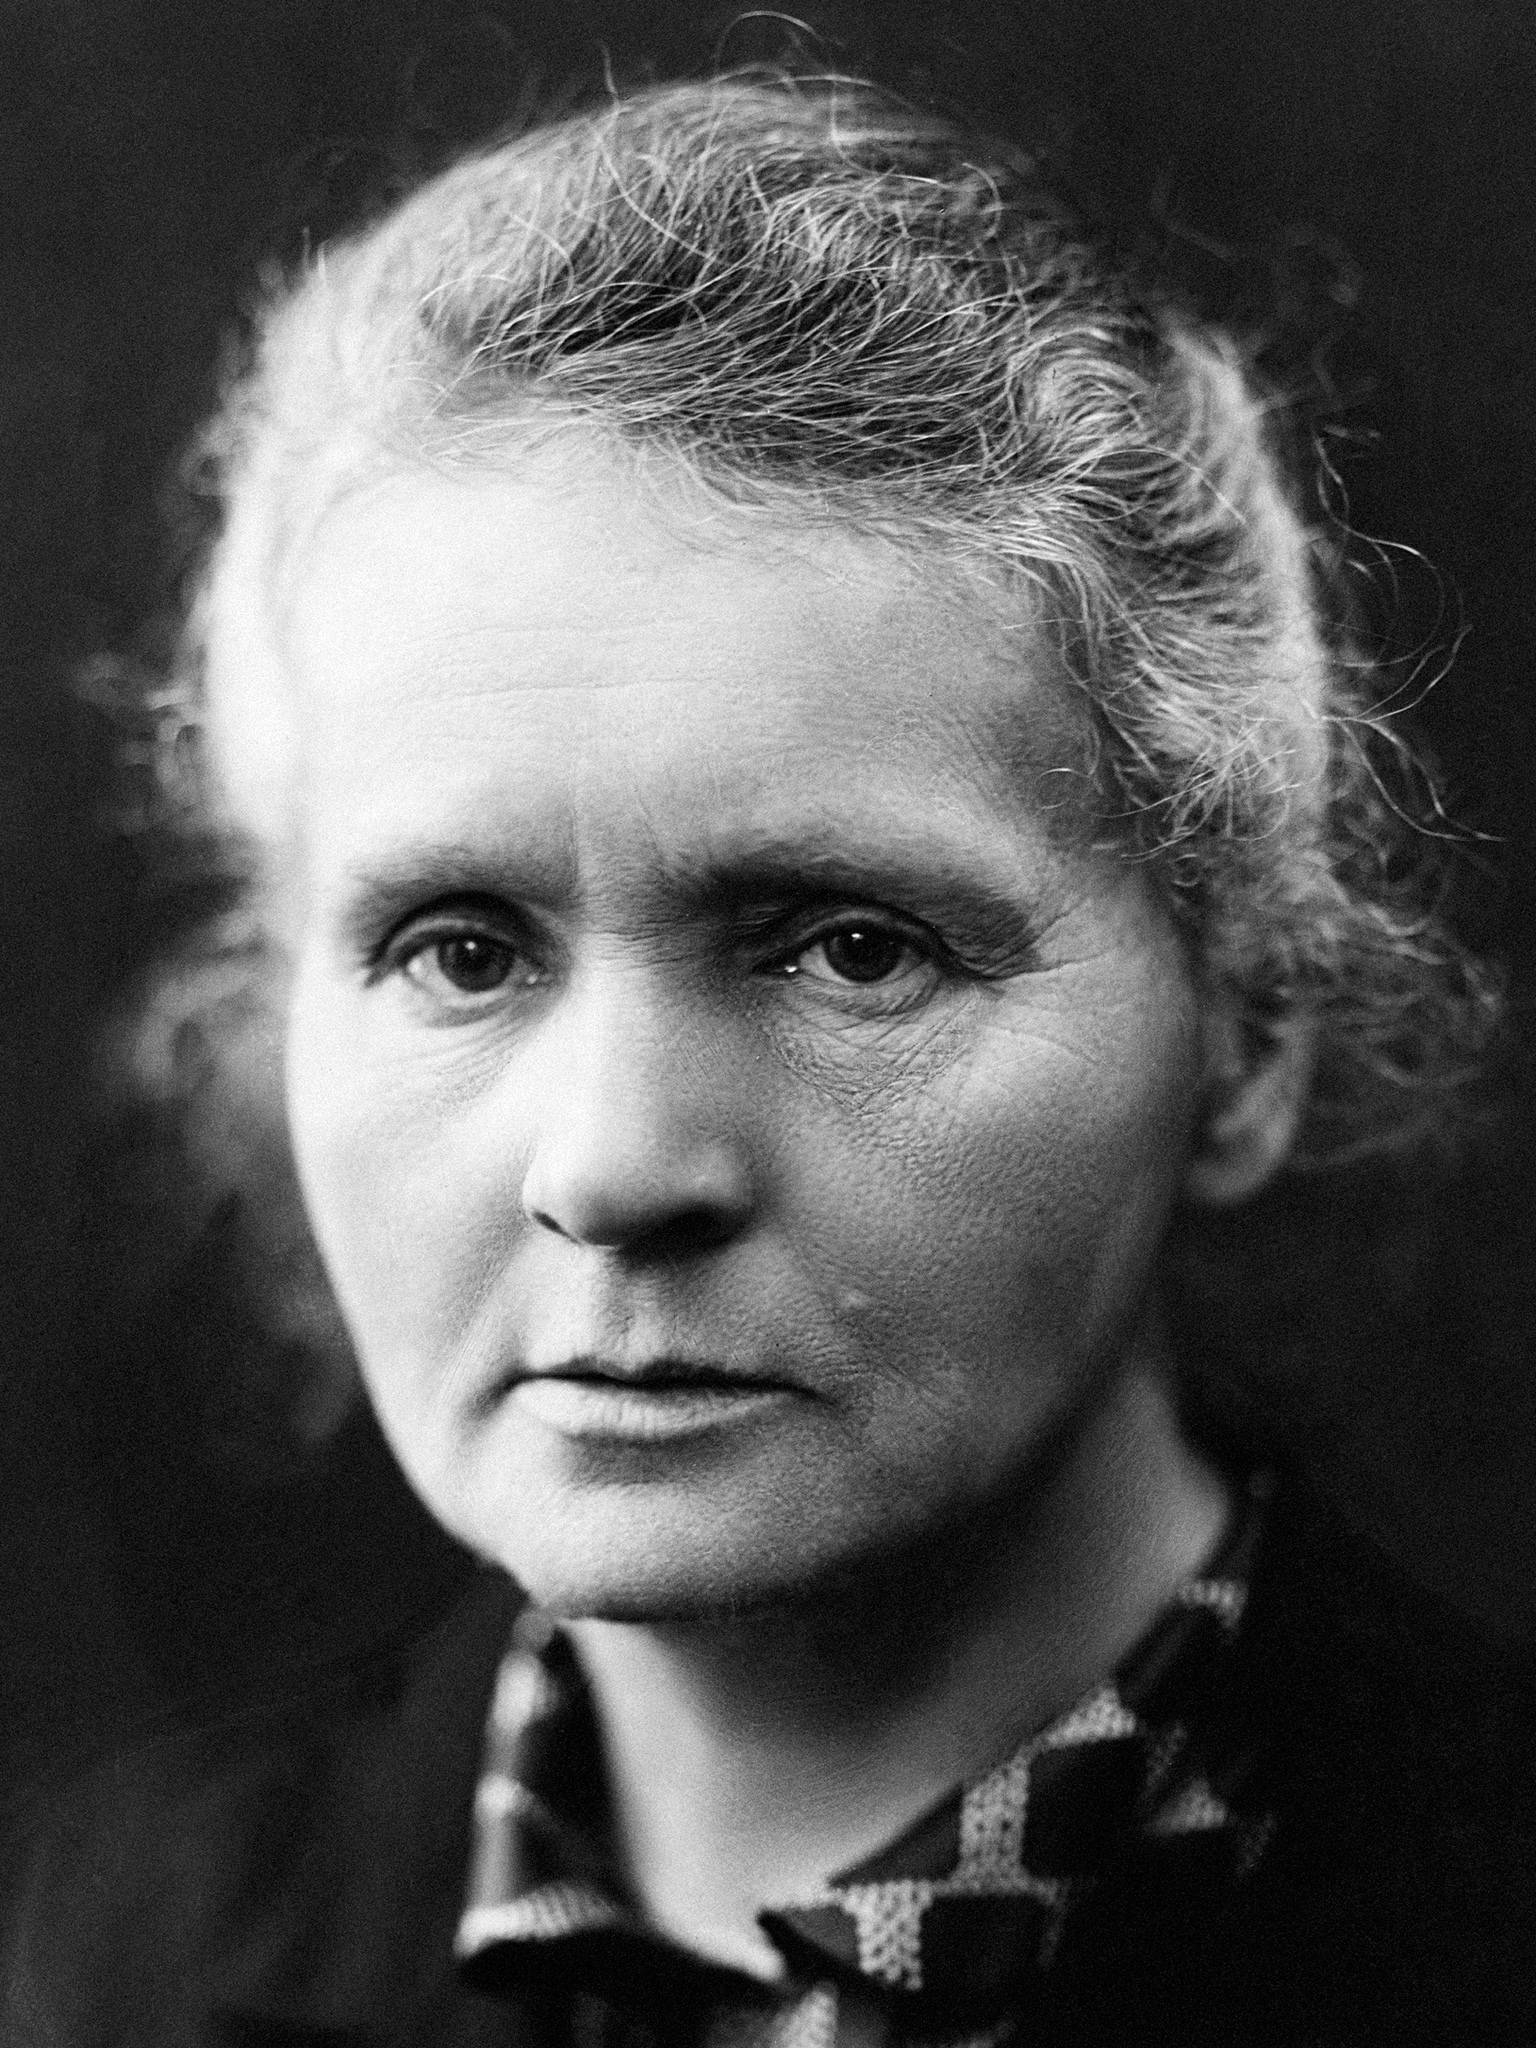 ca. 1926, France --- Portrait of physicist Madame Marie Curie. She was the first woman to be awarded the Nobel Prize for physics for the work on radioactive elements with her husband Pierre. --- Image by © Hulton-Deutsch Collection/CORBIS